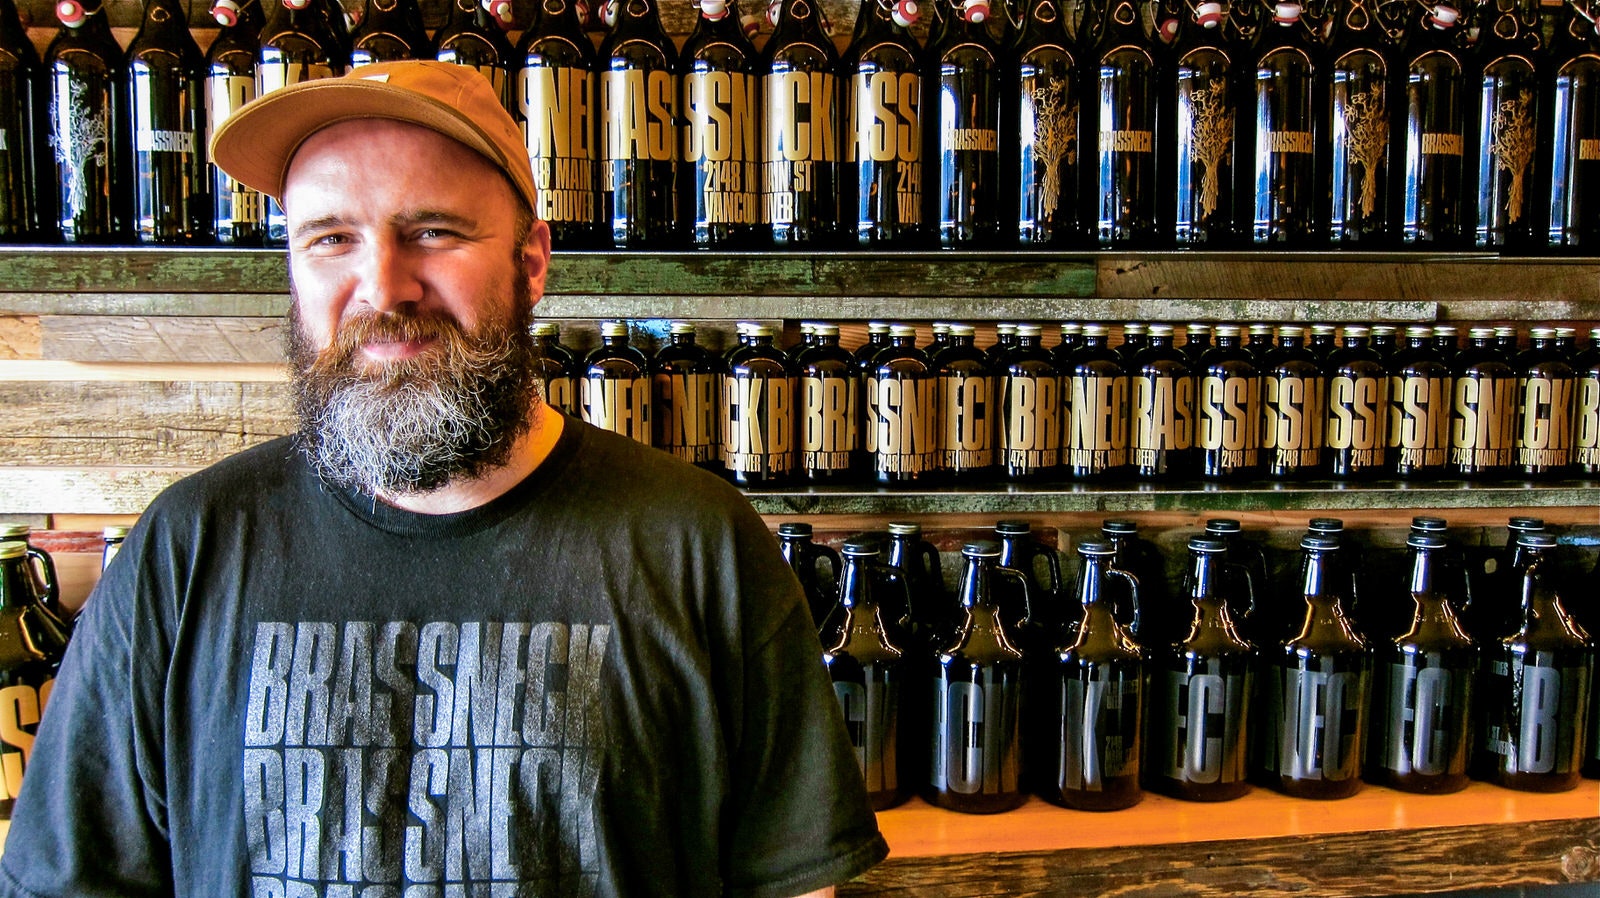 Co-owner Nigel Springthorpe stands in front of growlers at Brassneck Brewery © John Lee / Lonely Planet